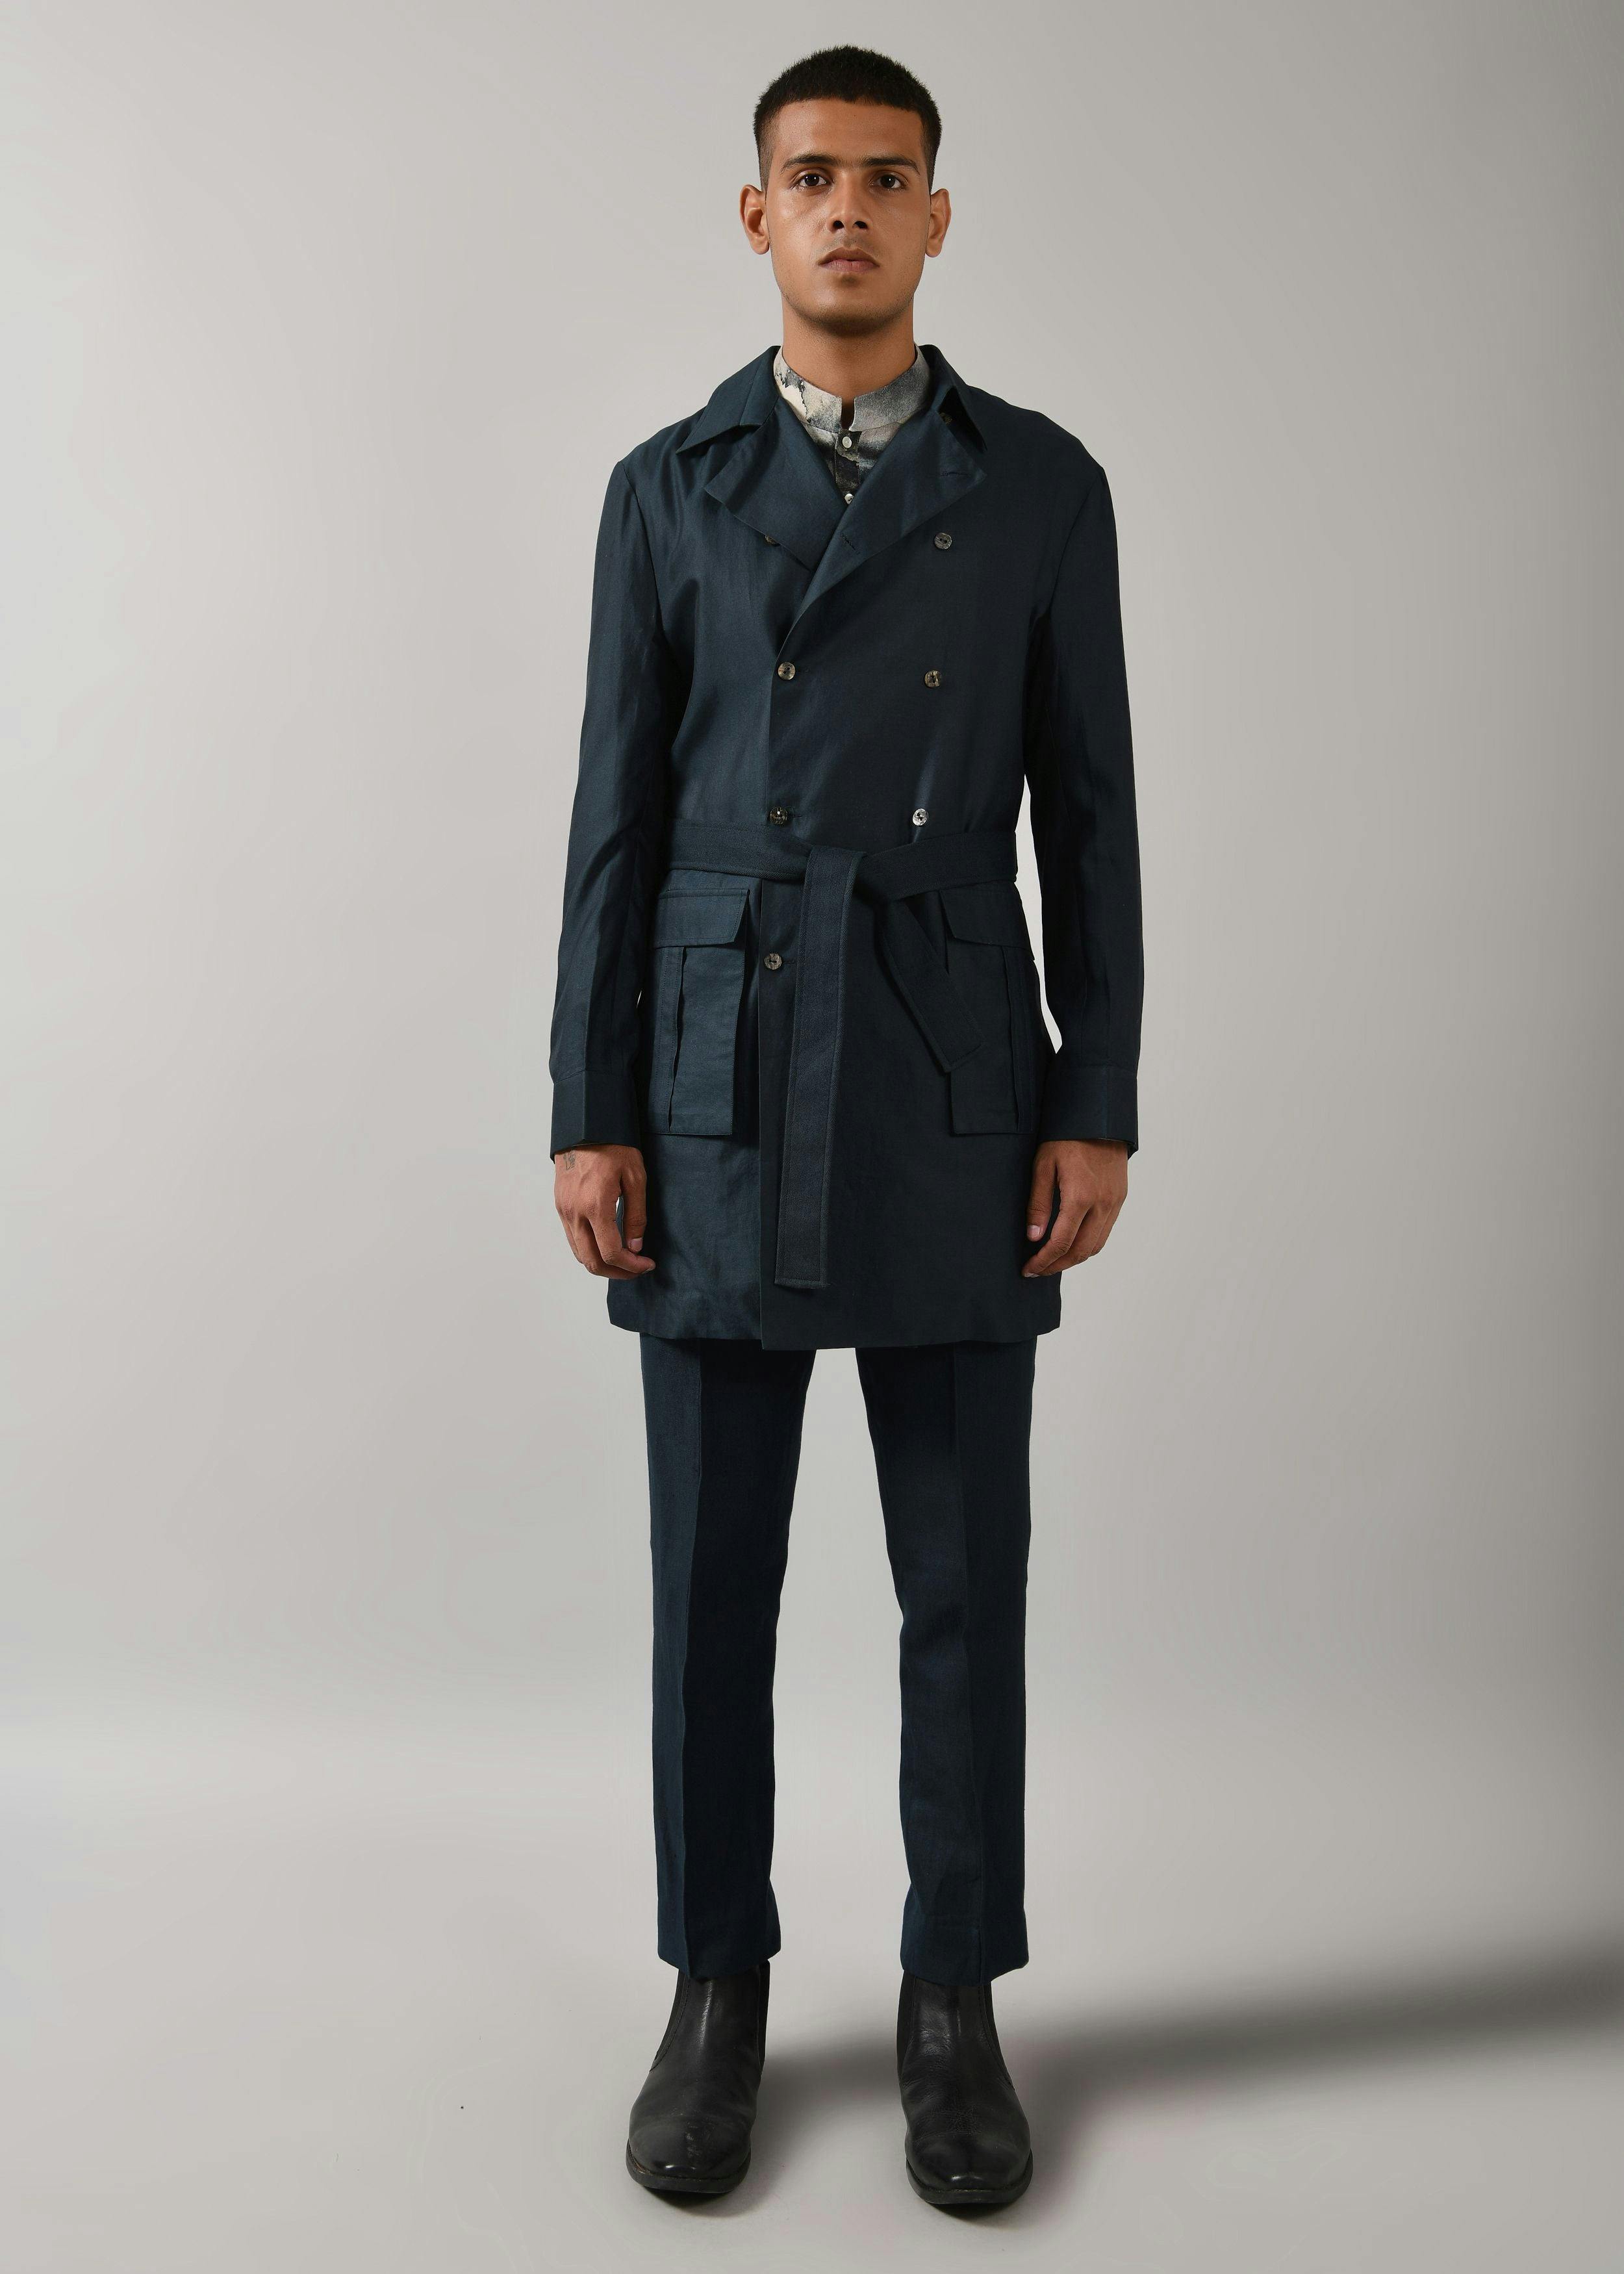 Teal Silk Trench Coat, a product by Country Made